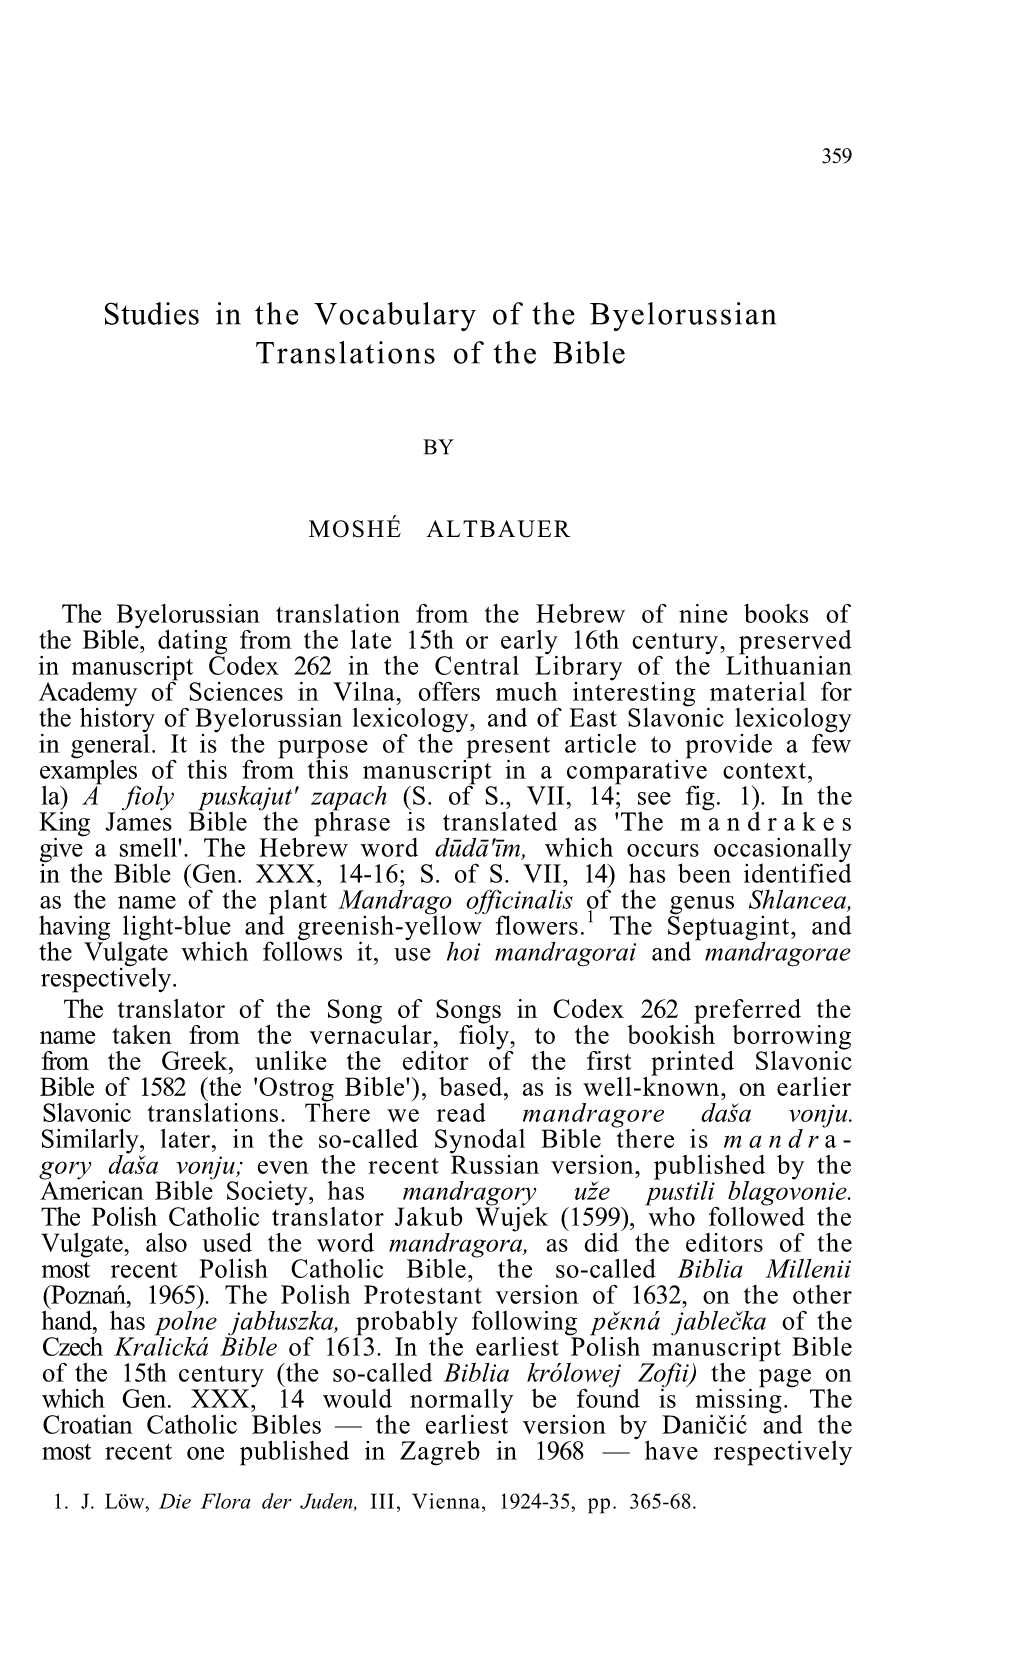 Studies in the Vocabulary of the Byelorussian Translations of the Bible